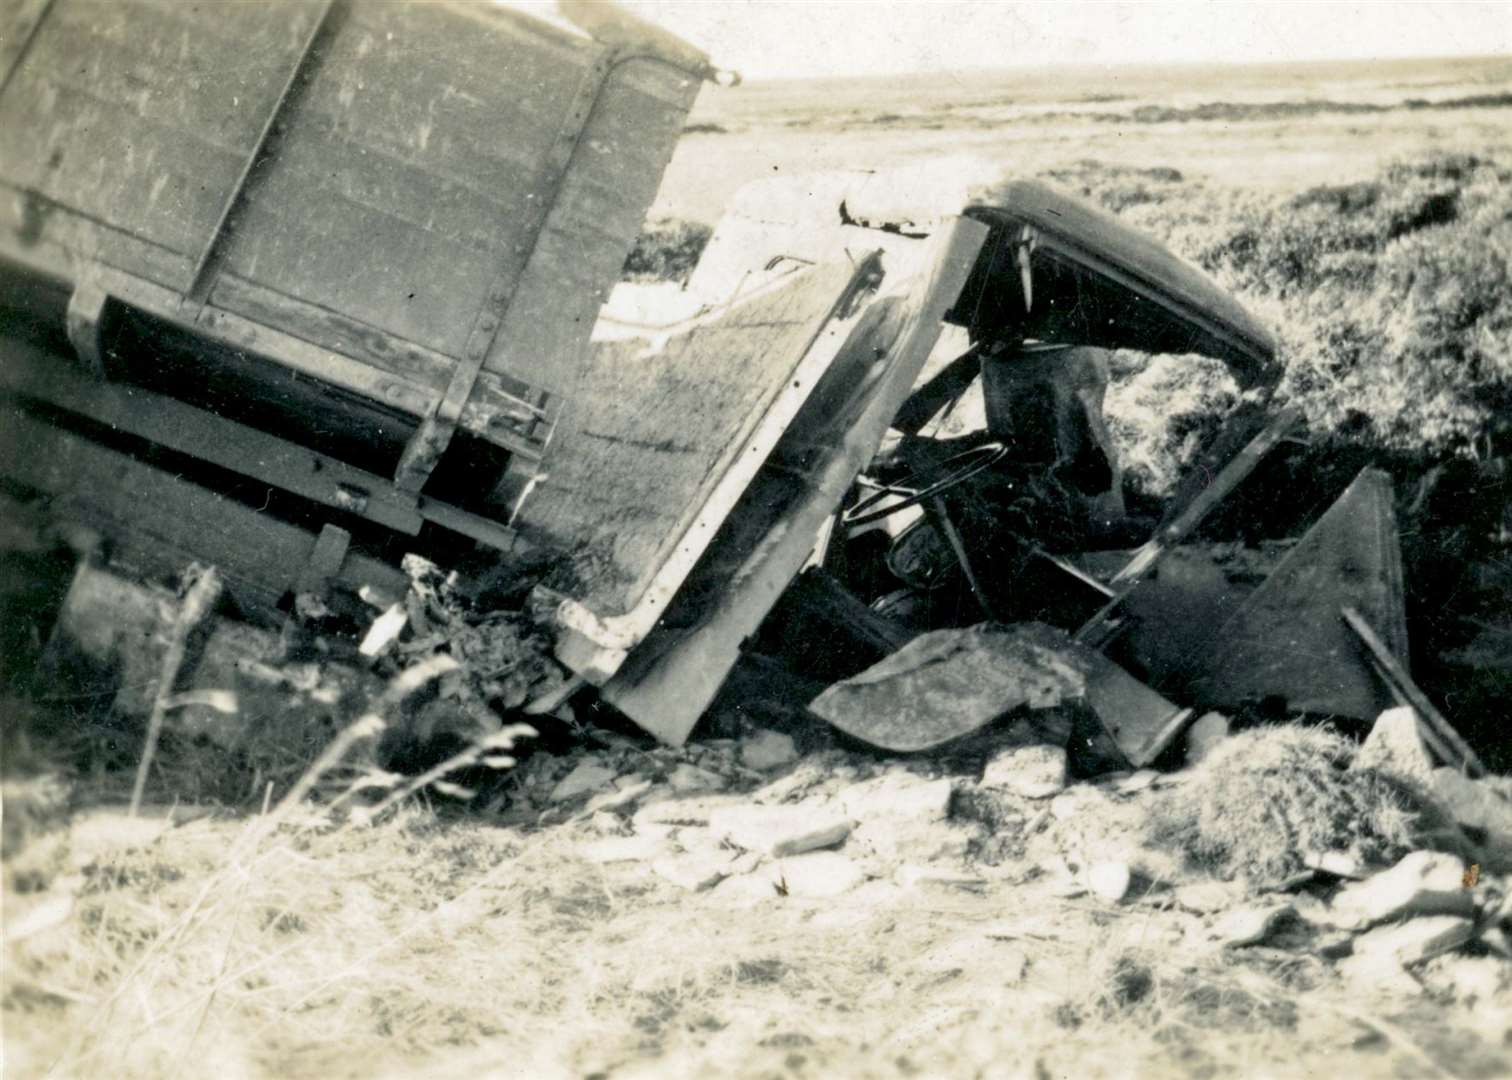 A Caithness casualty, one of many captured on camera over the years.